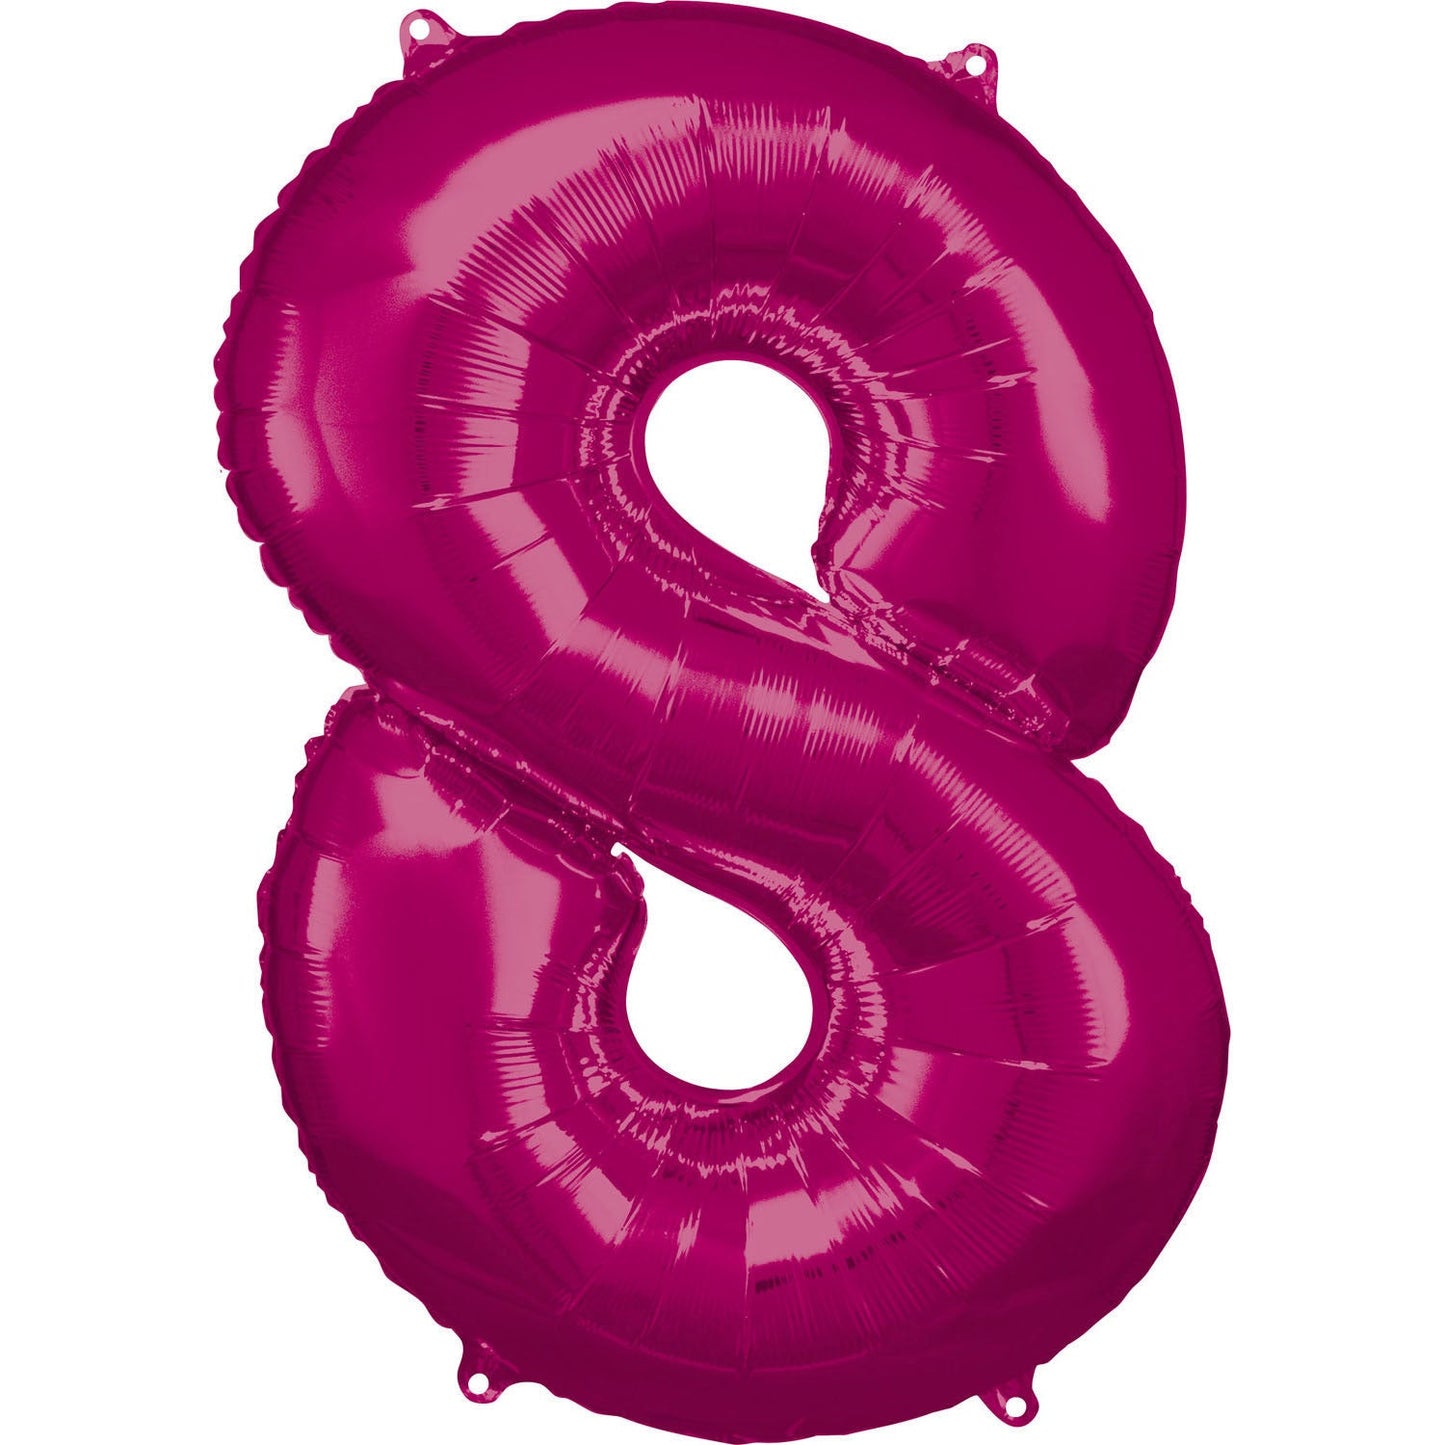 Pink Supershape Number 8 Foil Balloon 83cm (32in) height by 53cm (20in) width Balloon is sold uninflated. Can be inflated with air or helium.